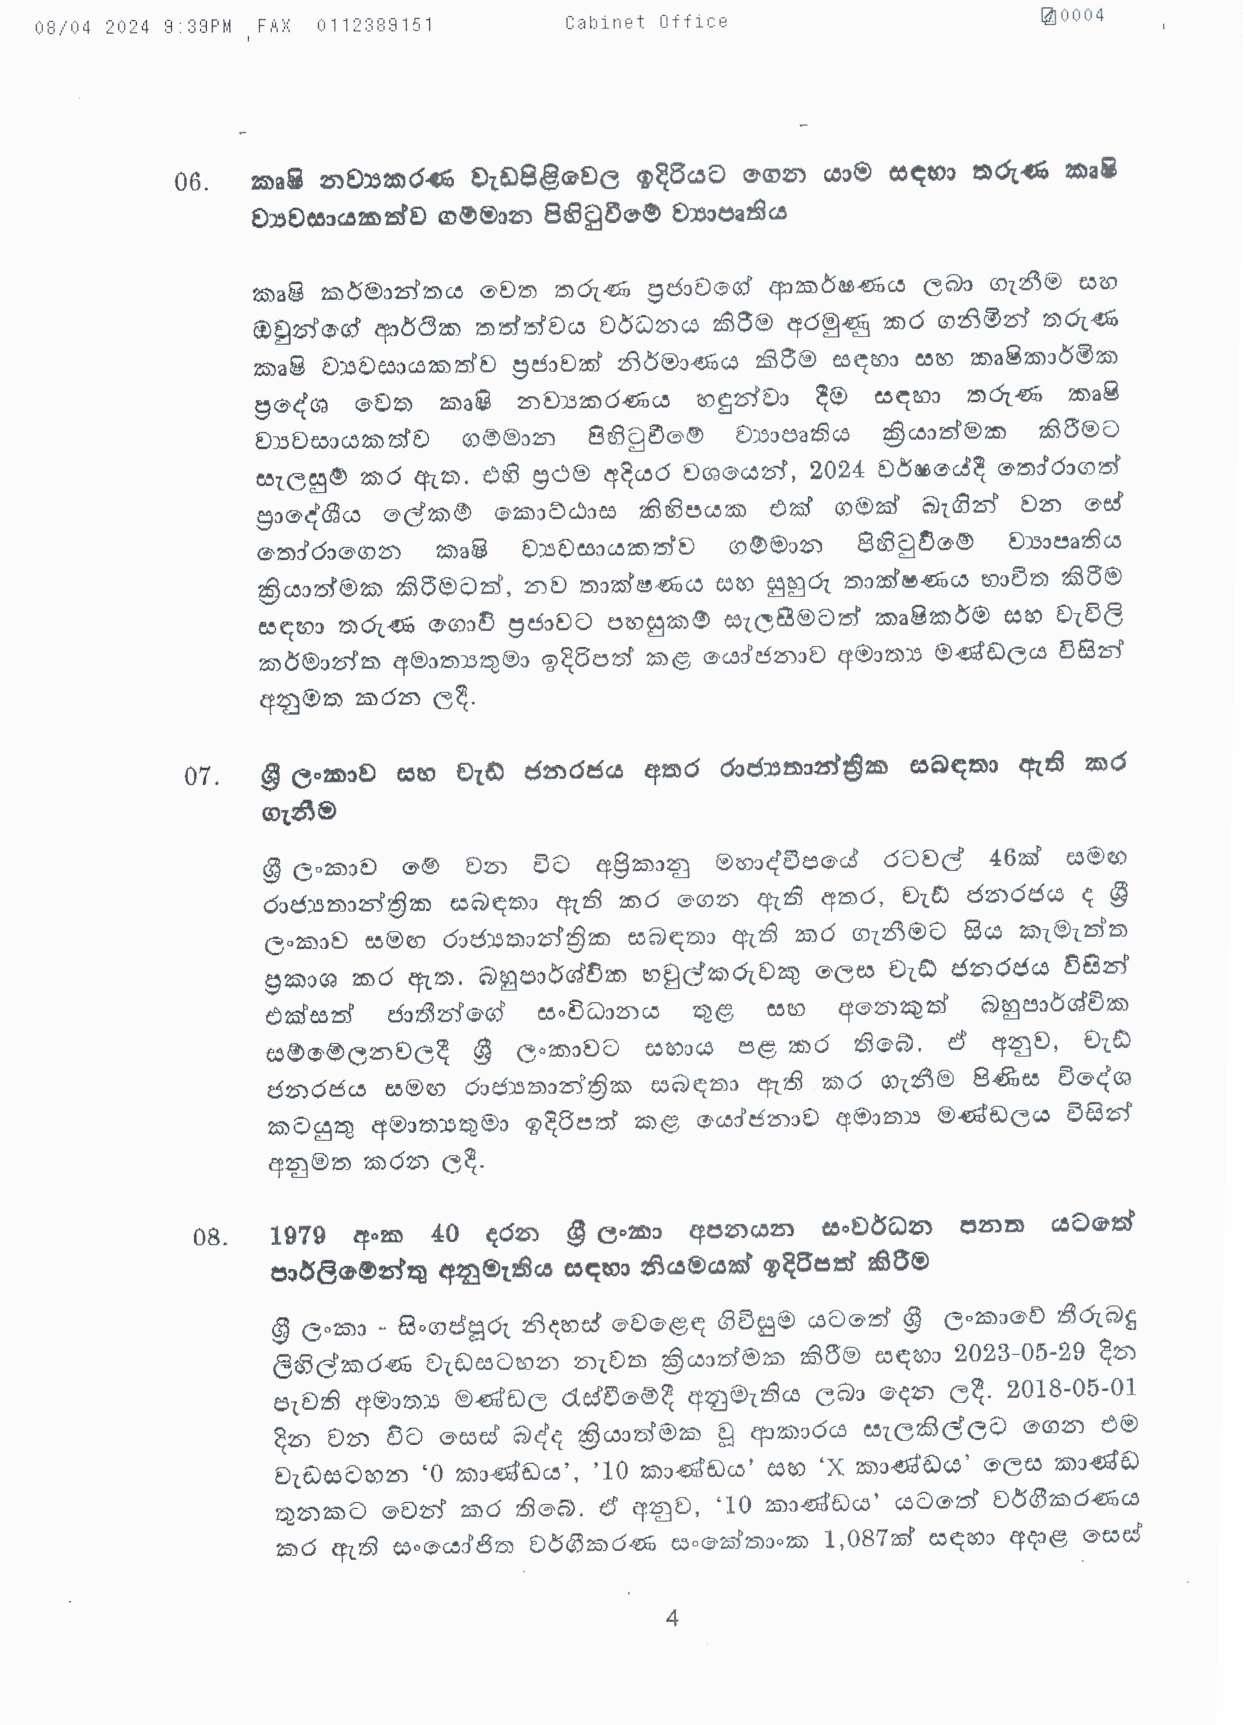 Cabinet Decision on 08.04.2024 page 004